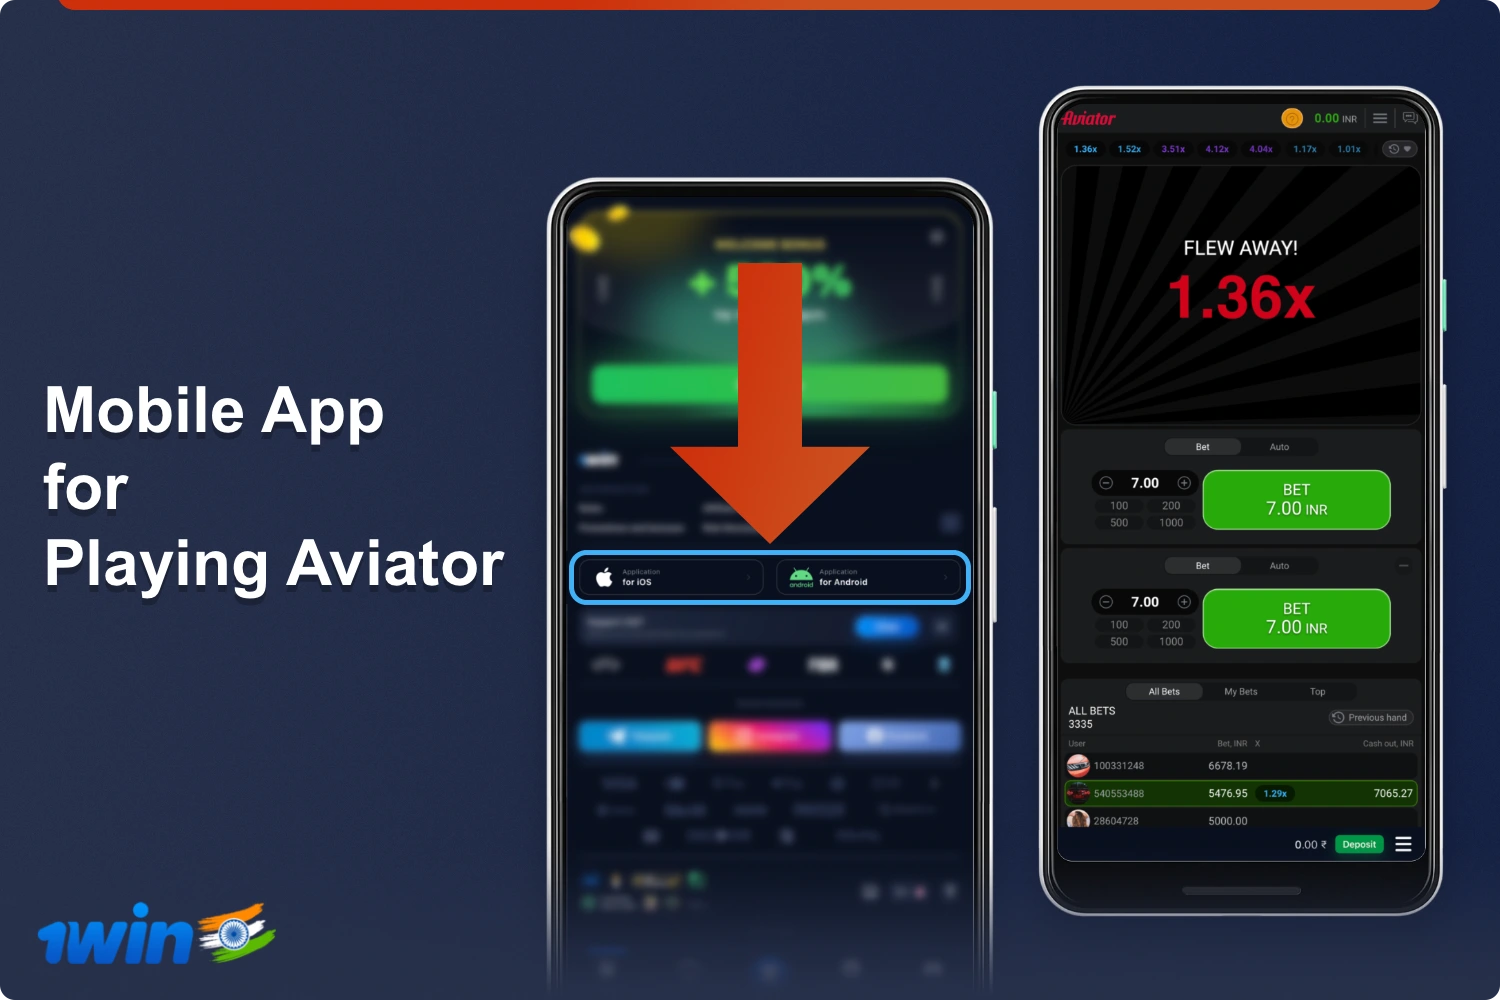 Users from India can play Aviator using the mobile app 1win